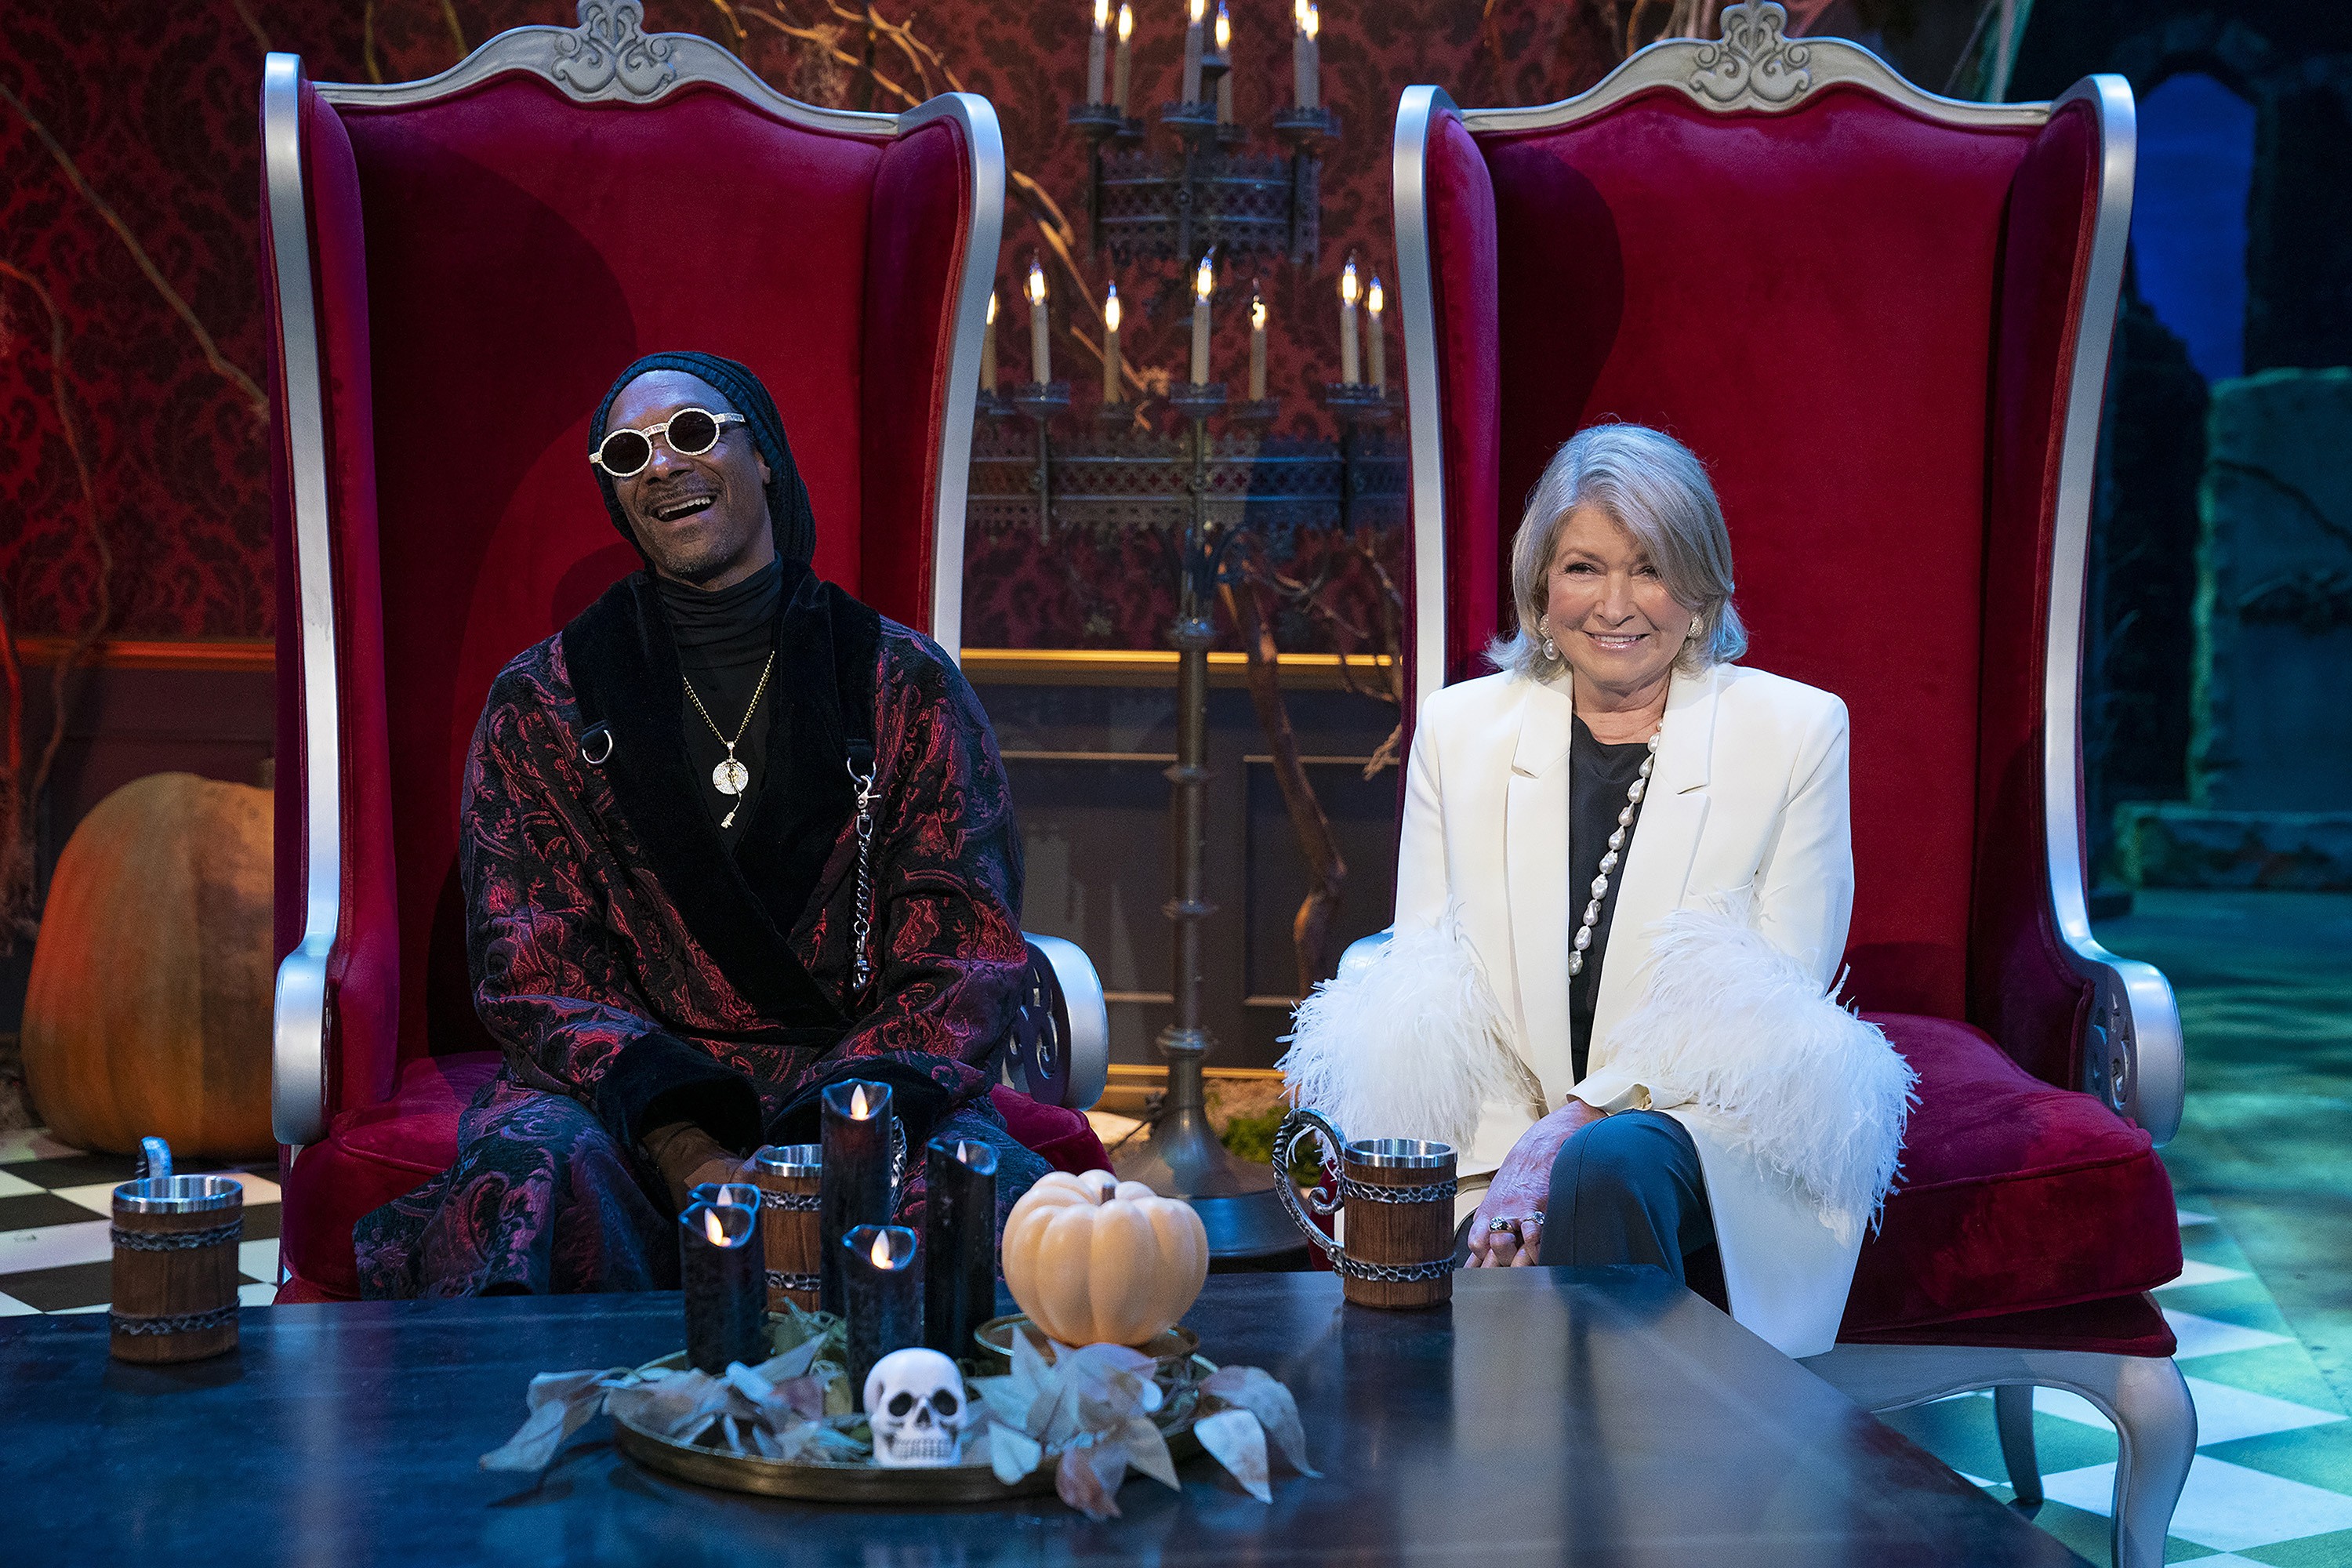 Snoop Dogg and Martha Stewart are Judging a Special BuzzFeed Halloween Baking Competition on Peacock